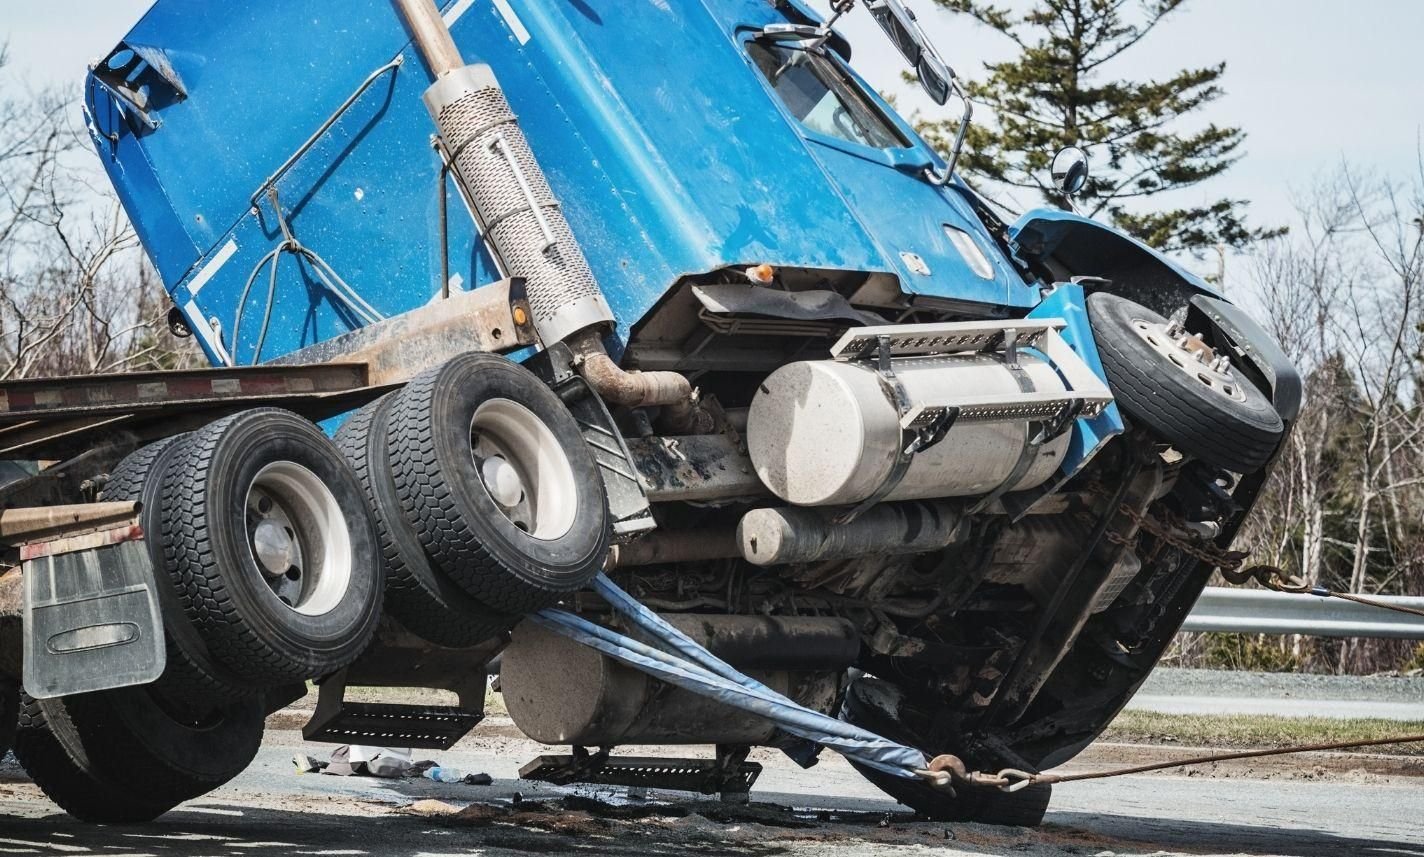 higgston-commercial-truck-accident-injury-lawyer